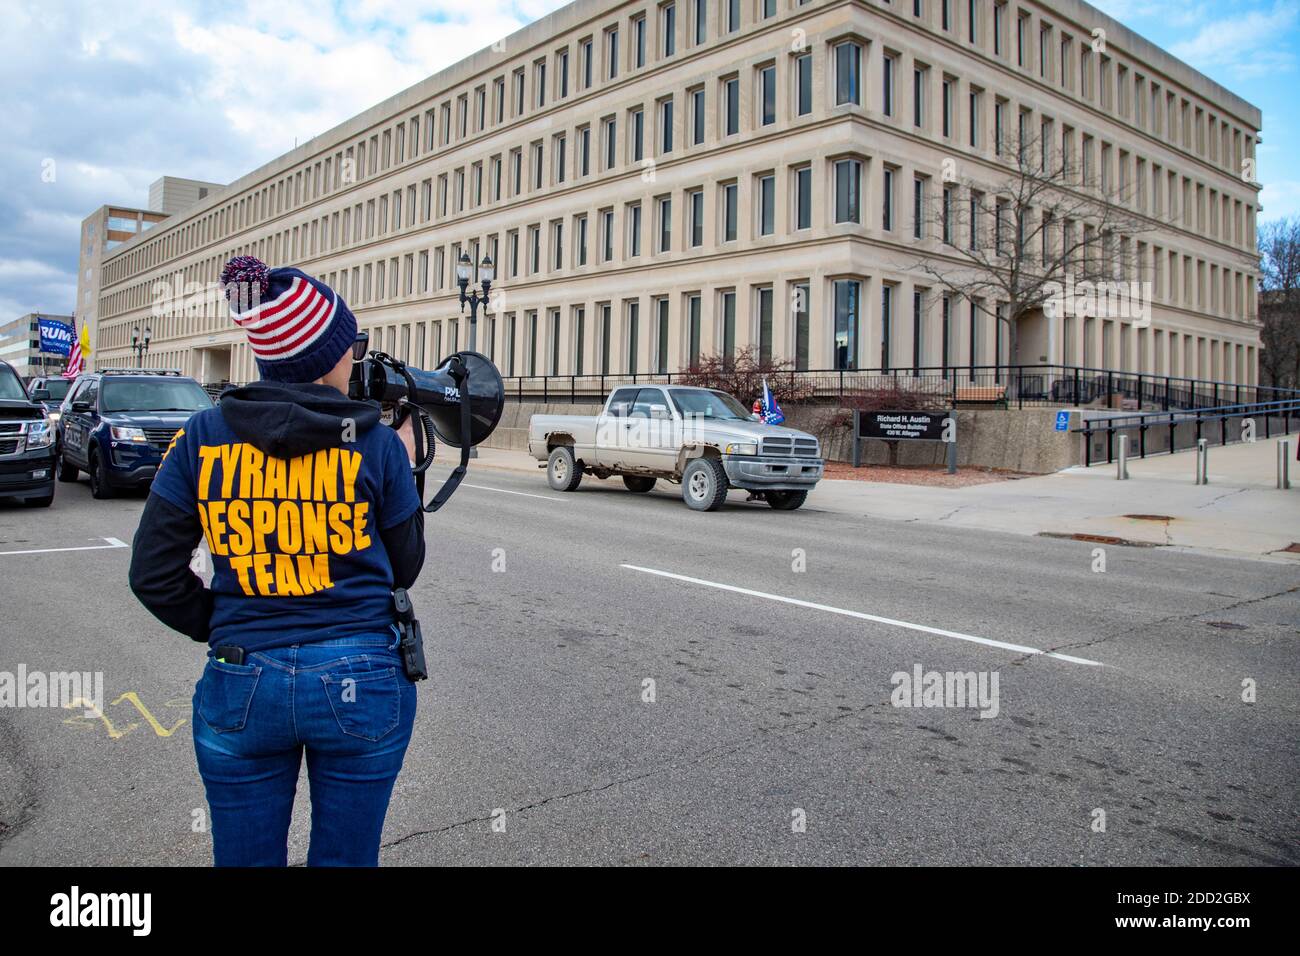 Lansing, Michigan, USA. 23rd Nov, 2020. An pistol-carrying supporter of President Trump wears a 'Tyranny Response Team' sweatshirt outside the Michigan Secretary of State office as the Michigan Board of State Canvassers meets to decide whether to certify the results of the 2020 presidential election. The board subsequently certified the results, which showed Joe Biden ahead of President Trump by about 150,000 votes. Credit: Jim West/Alamy Live News Stock Photo